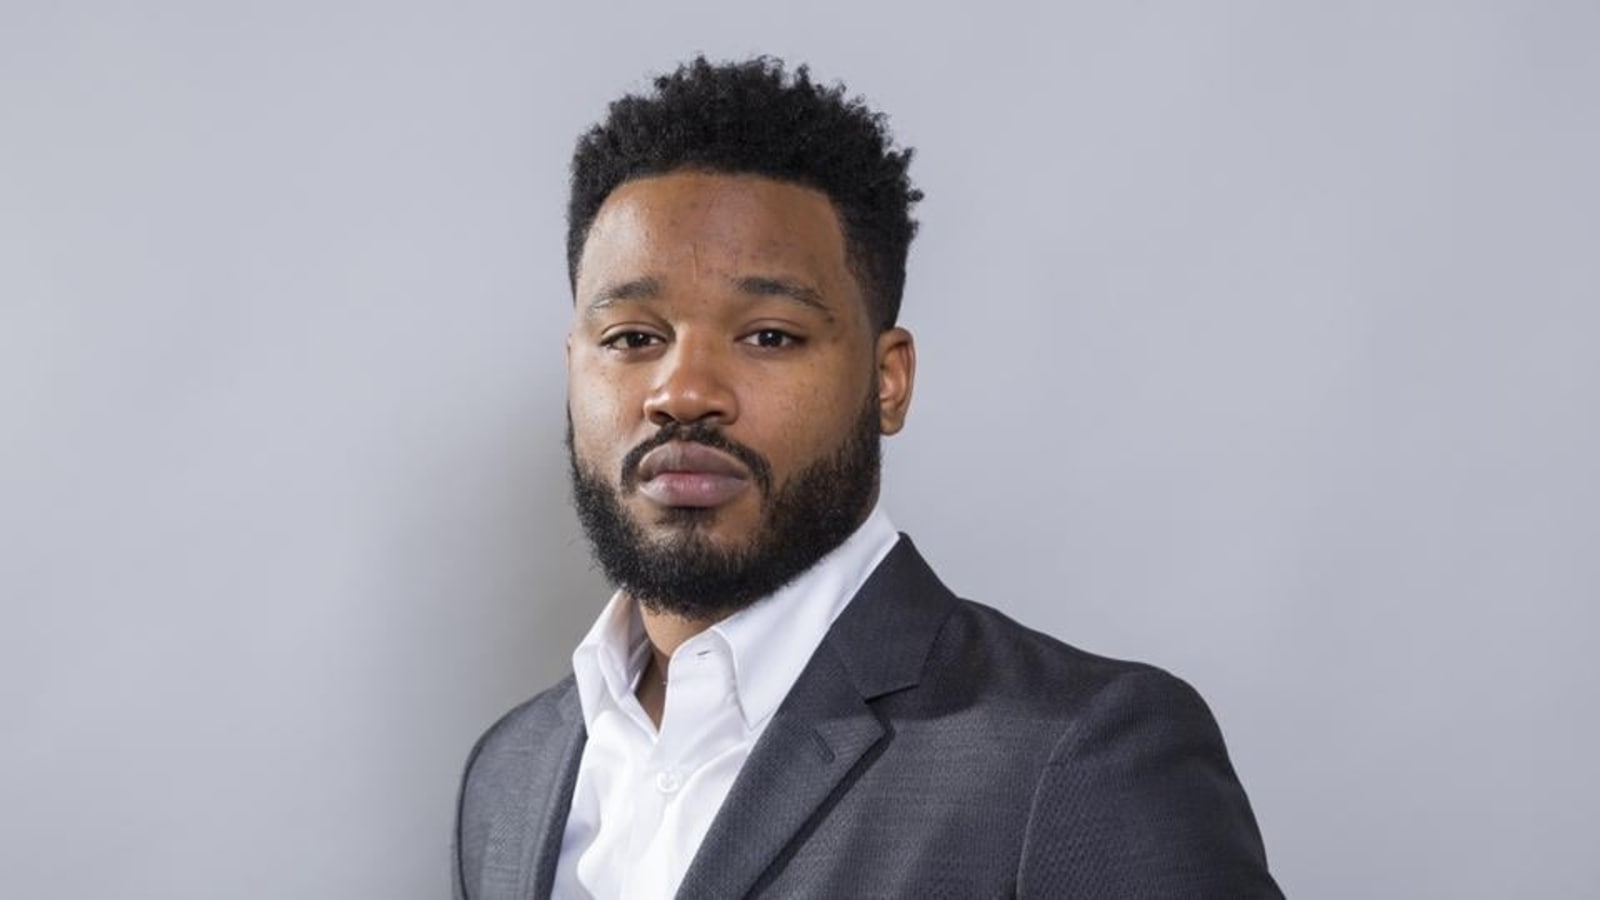 Black Panther director Ryan Coogler was detained, put in handcuffs after being mistaken for a bank robber